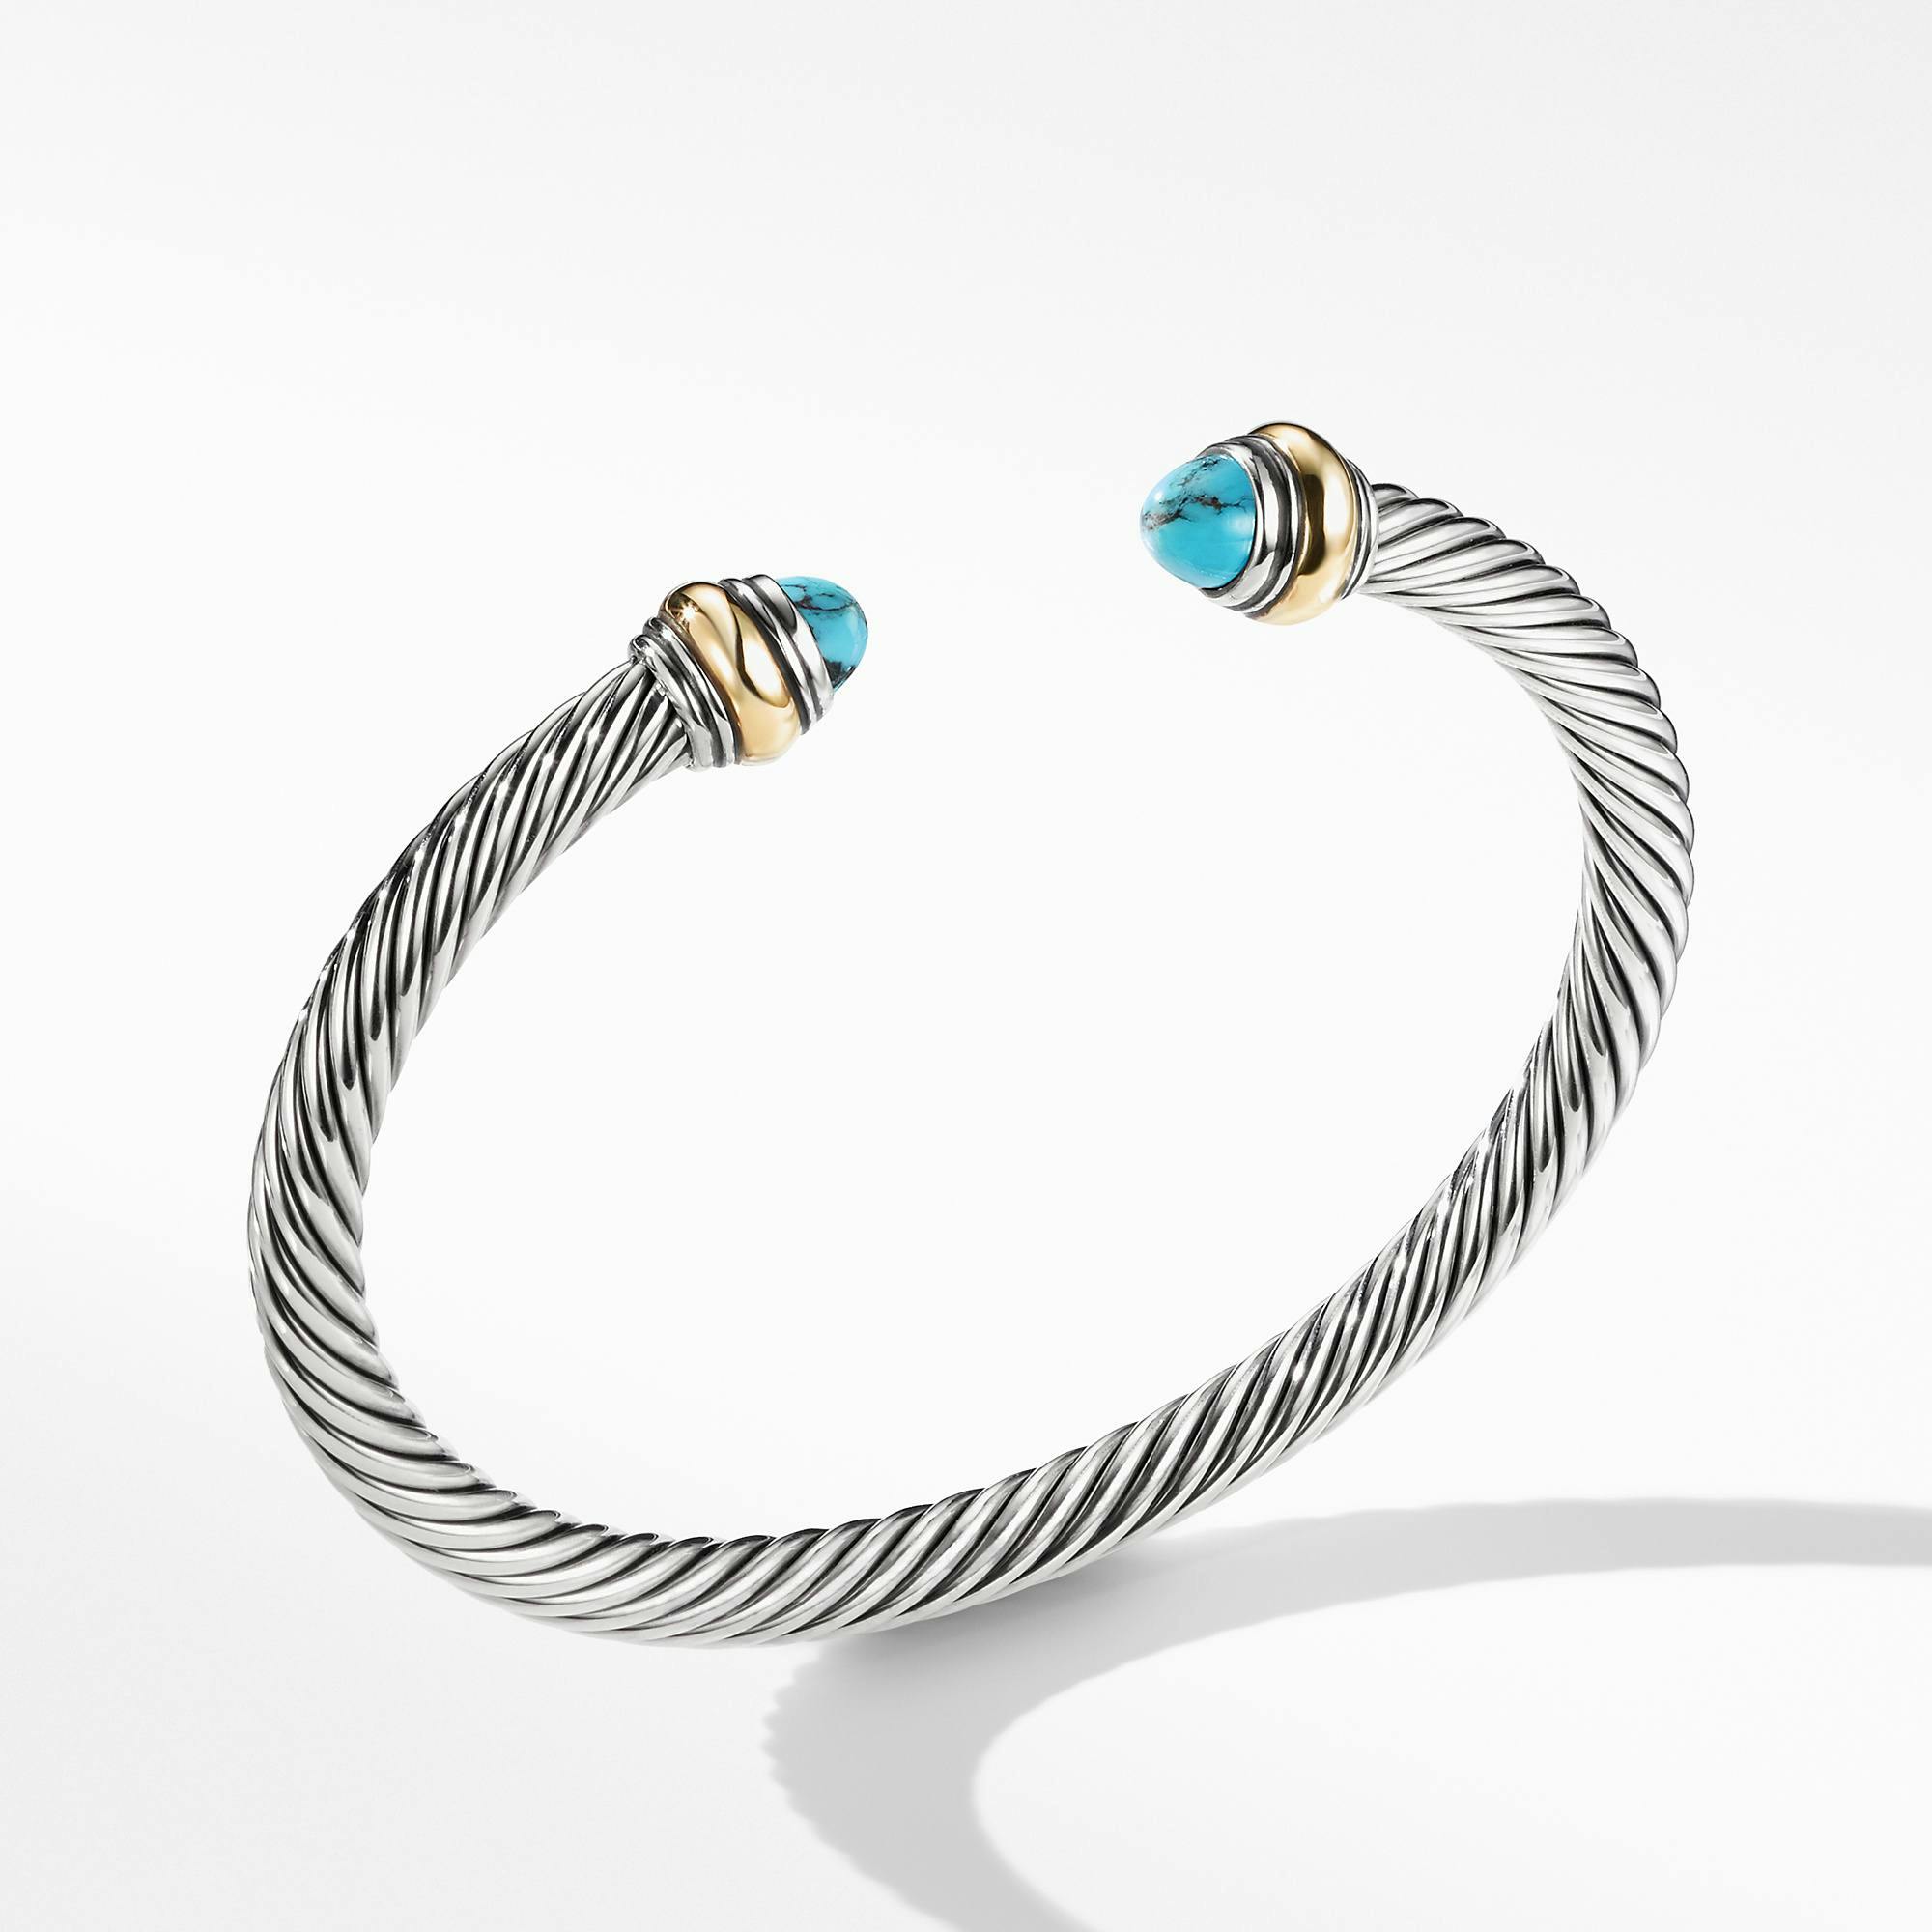 David Yurman Bracelet with Turquoise and 14K Gold